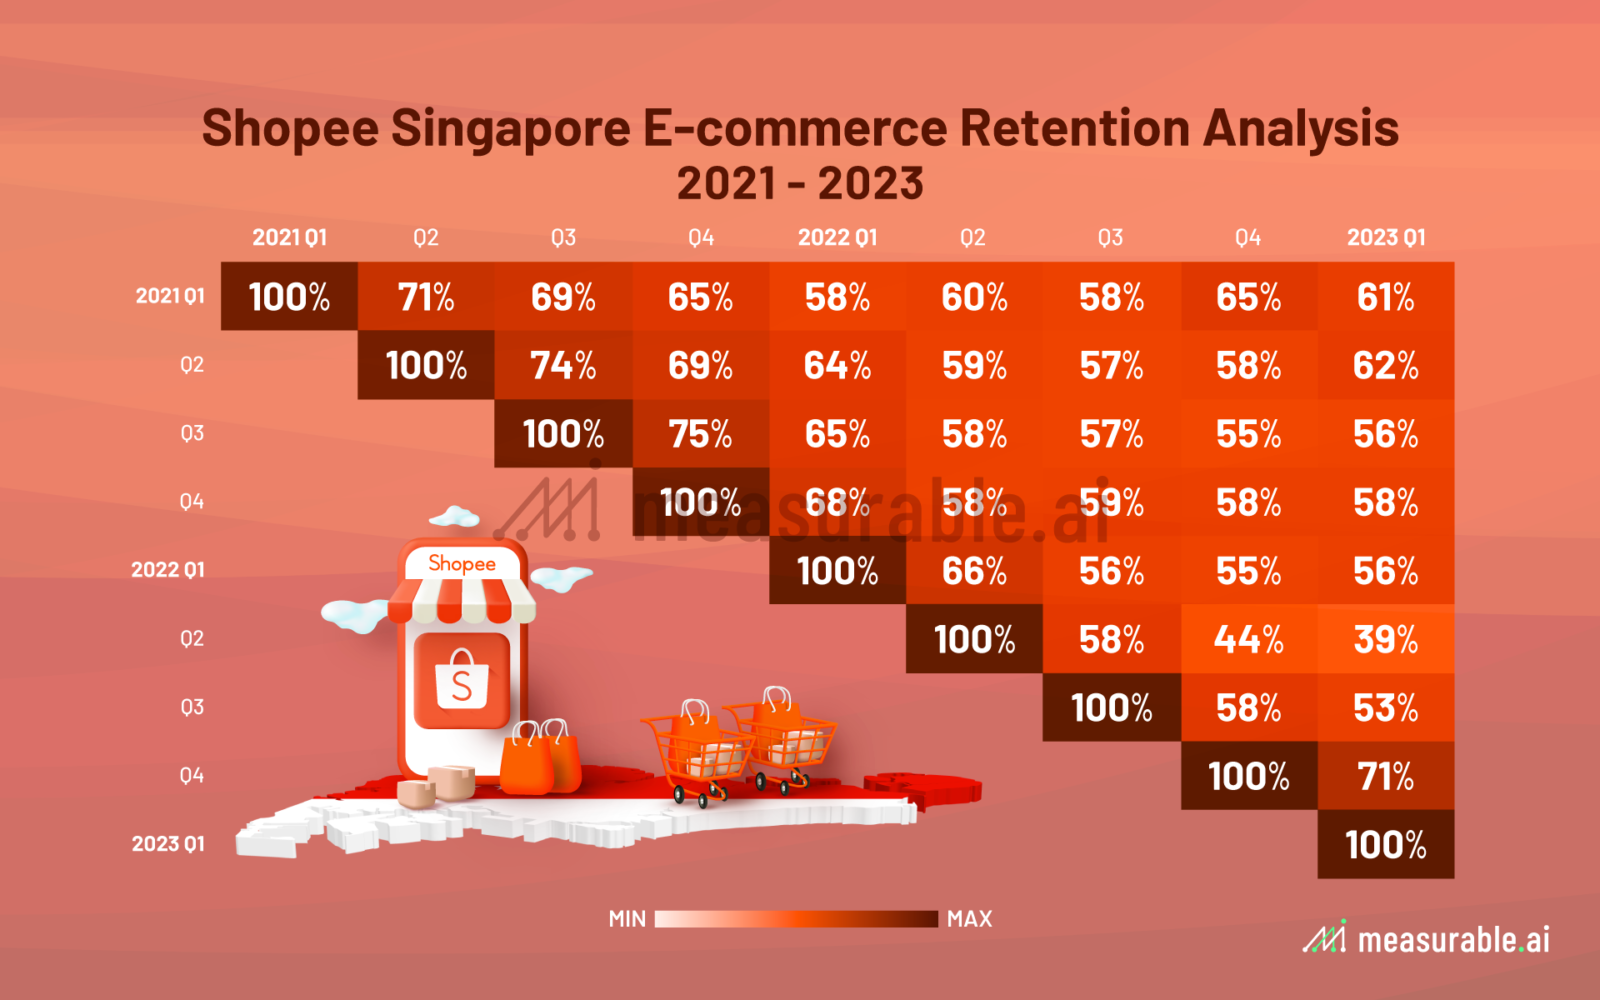 Shopee braces for e-commerce battle in Southeast Asia as competitors close  in